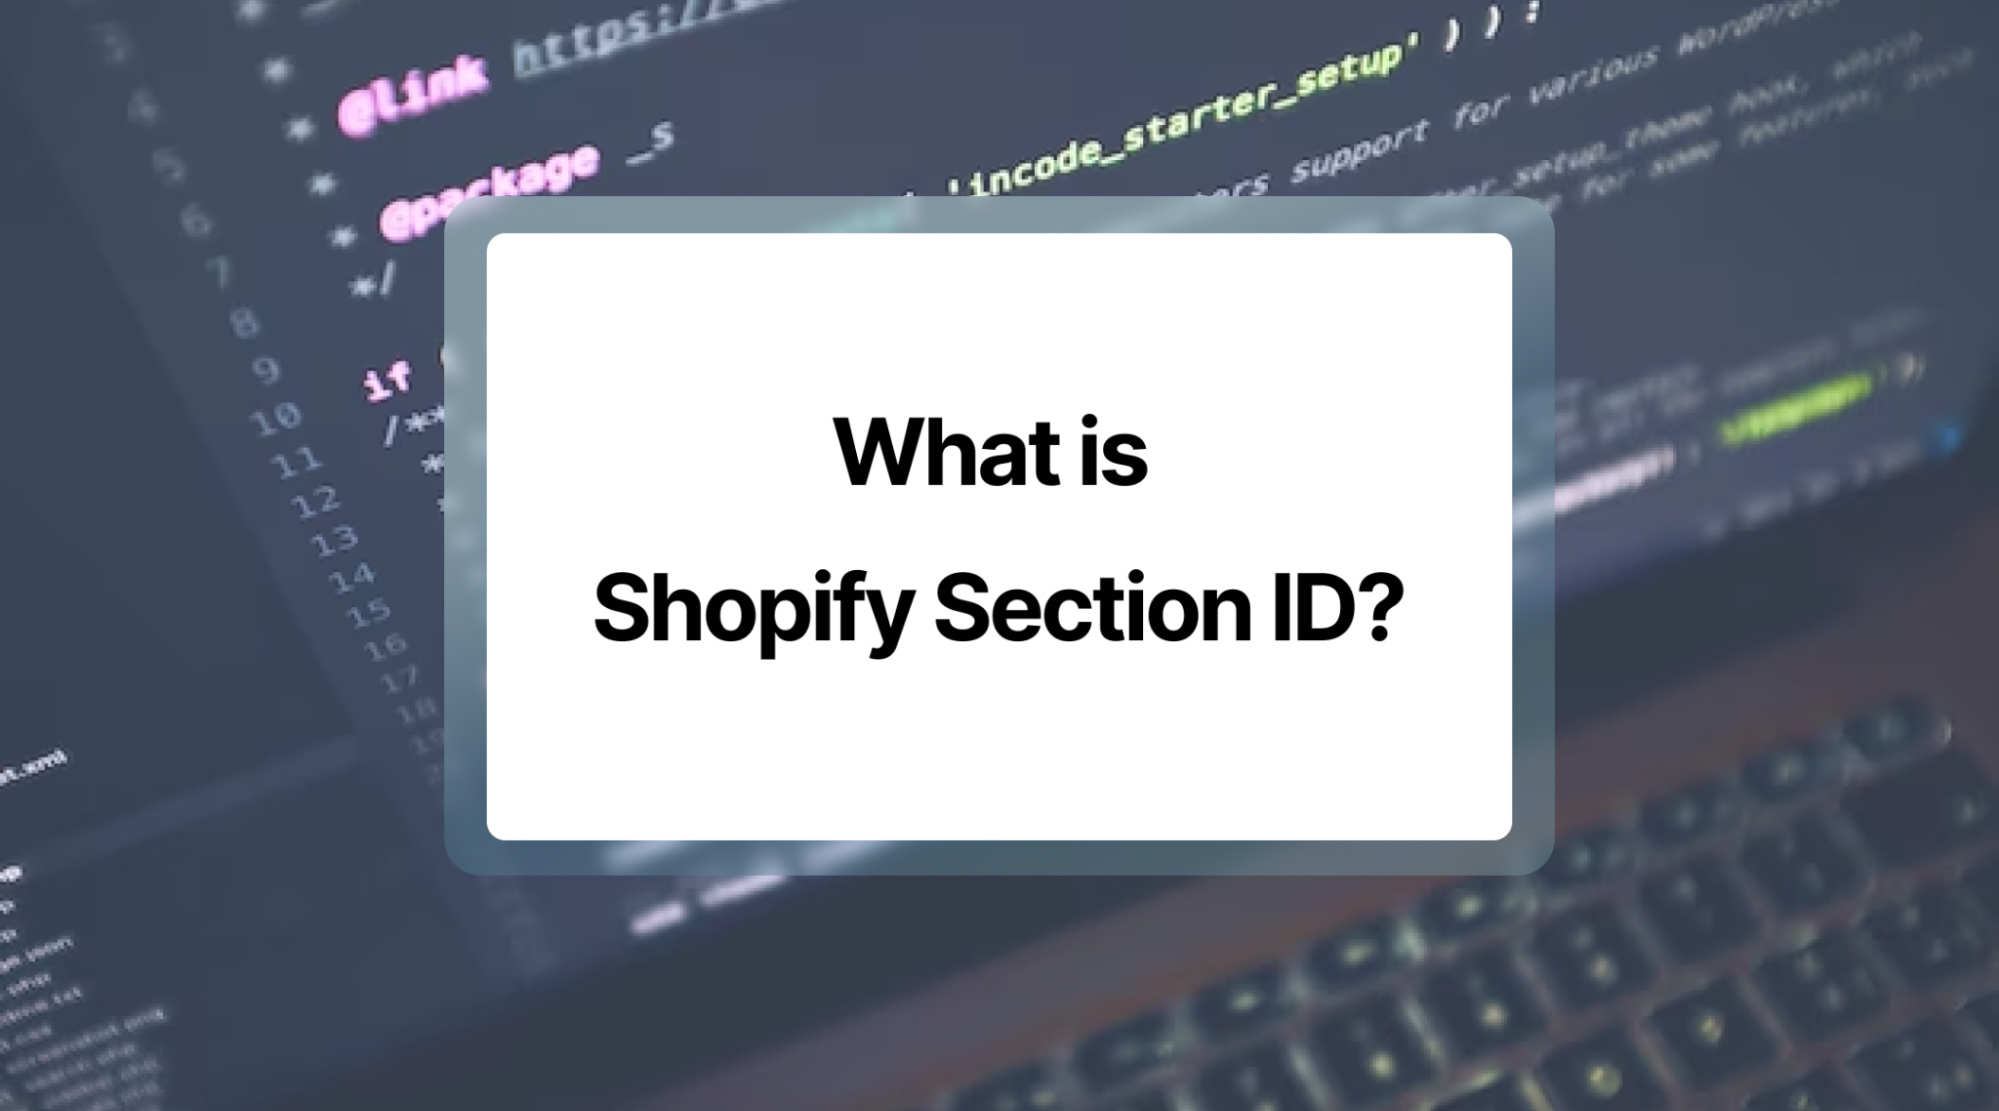 what is Shopify section ID?